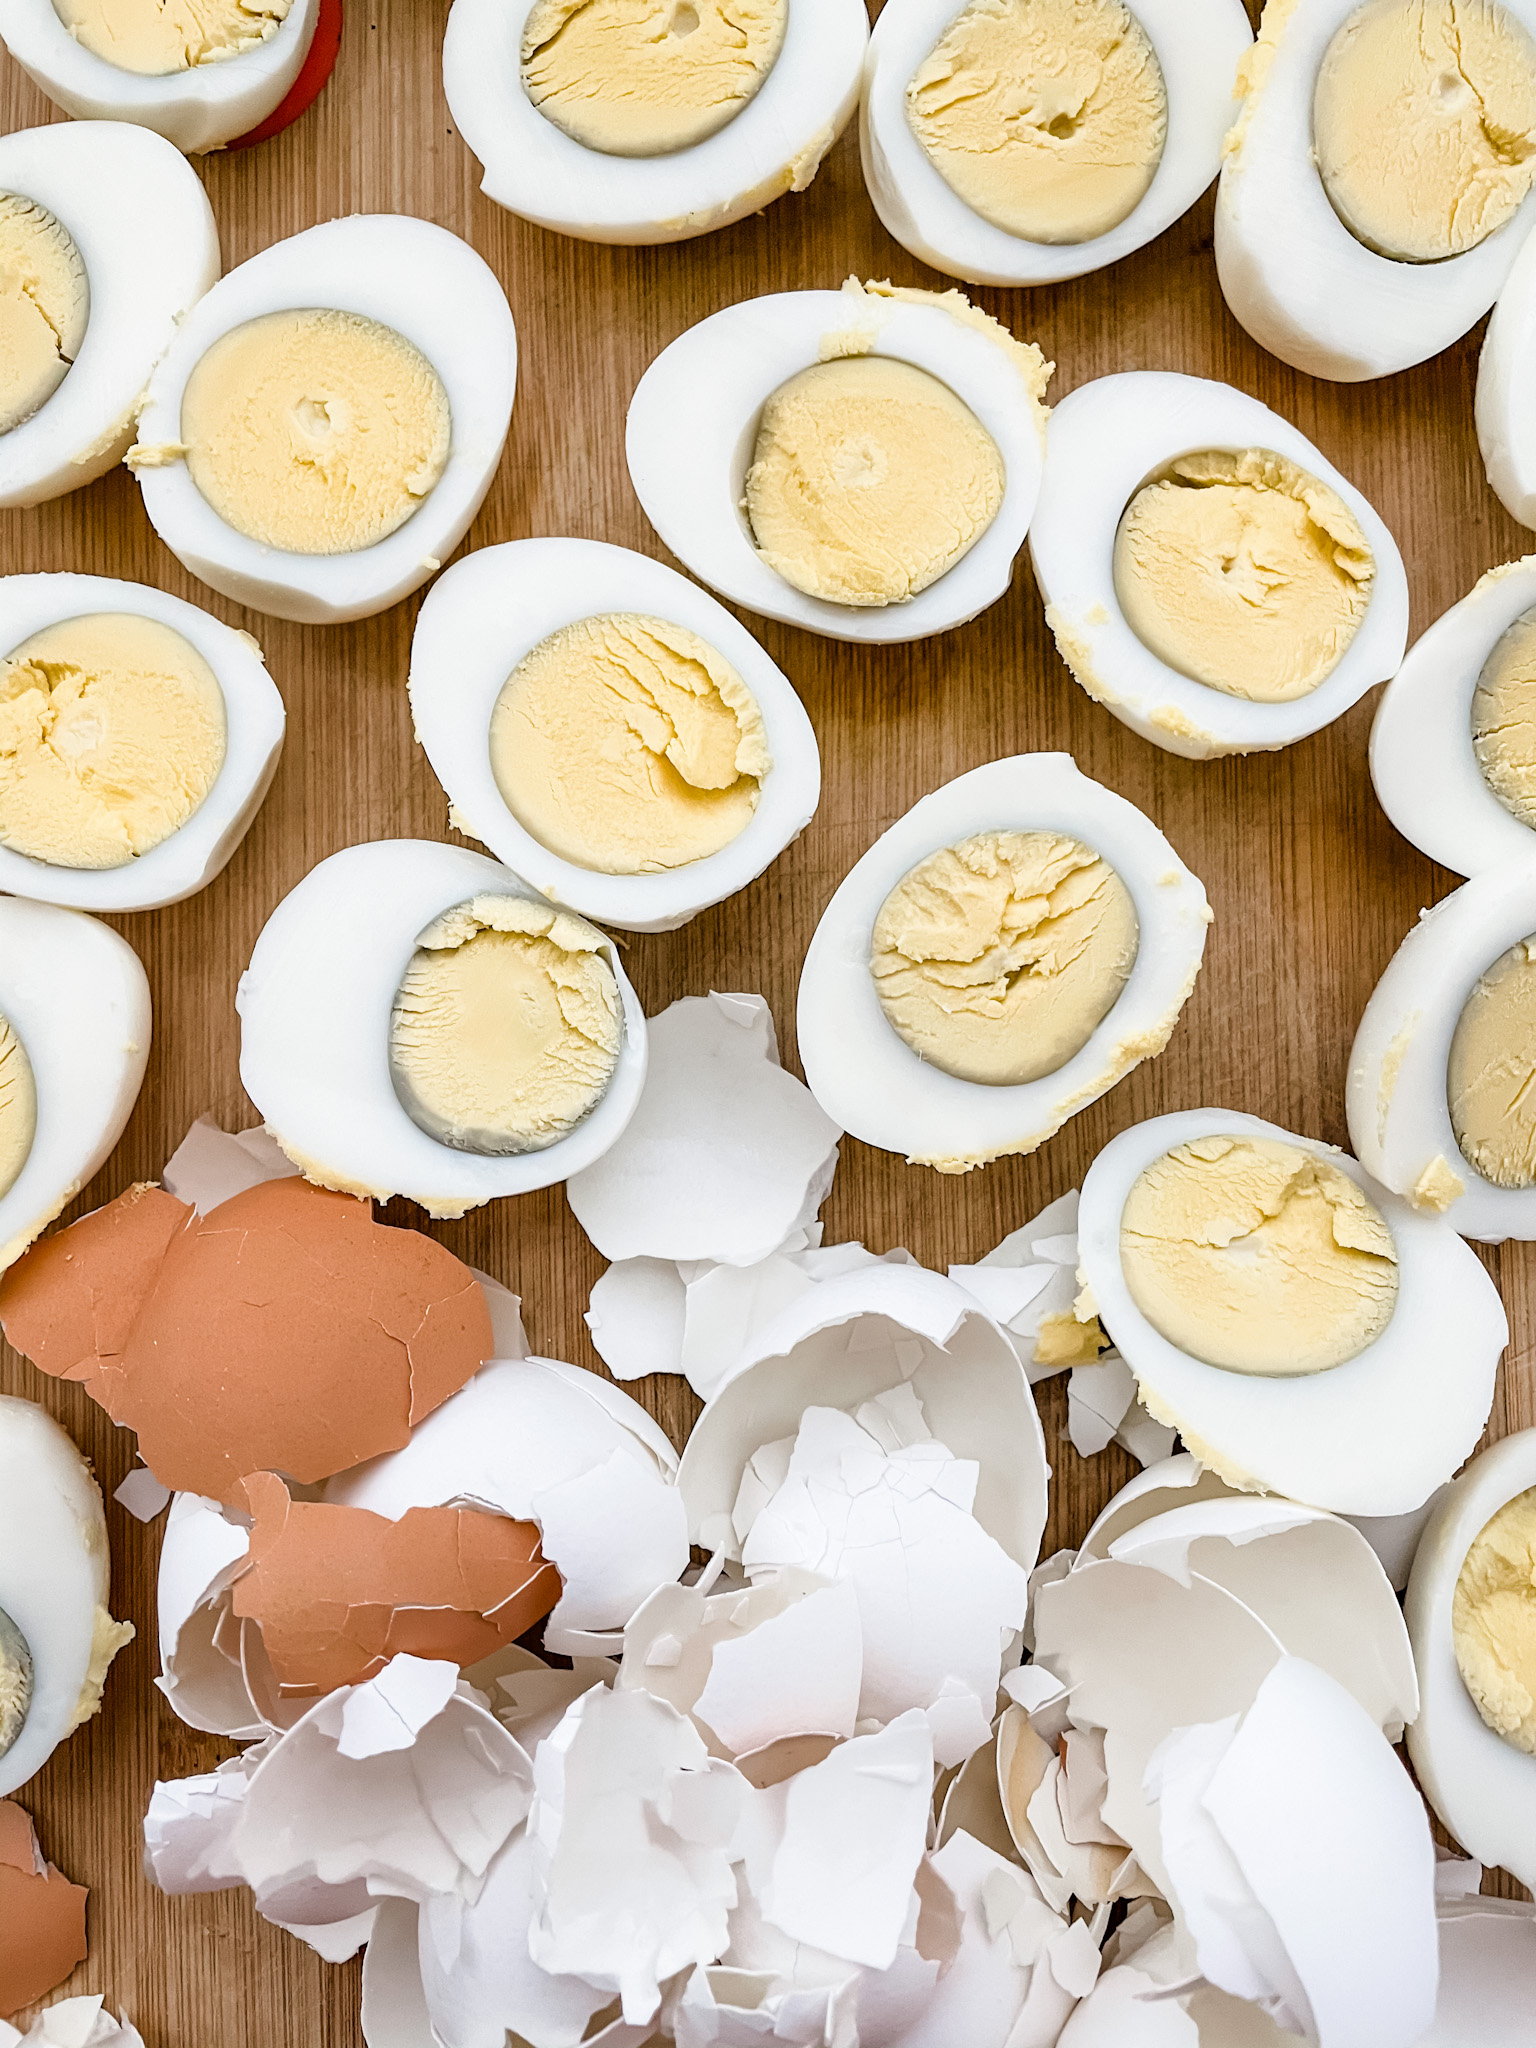 Shelled and halved hard-boiled eggs and their cracked shells on a wooden surface.